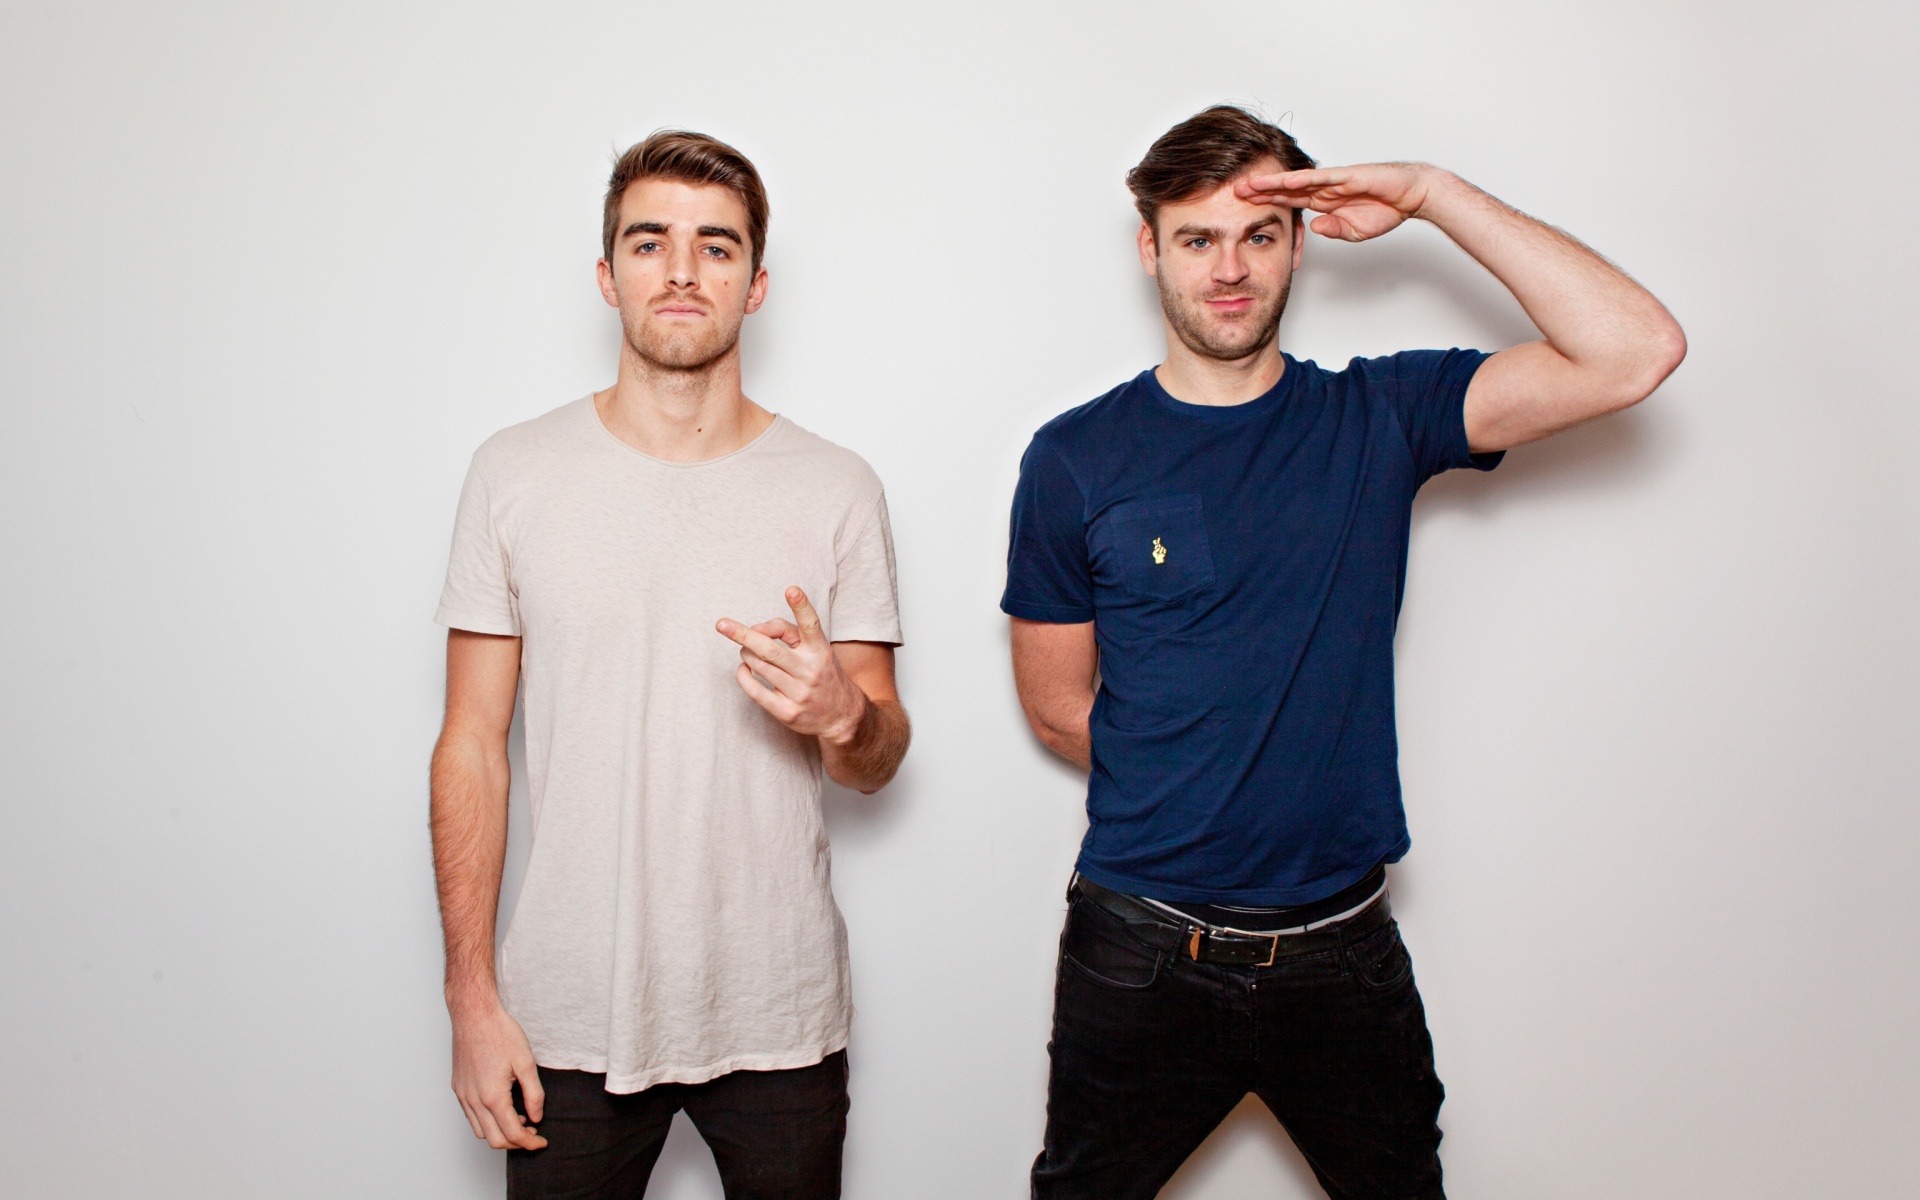 The Chainsmokers with Andrew Taggart and Alex Pall screenshot #1 1920x1200